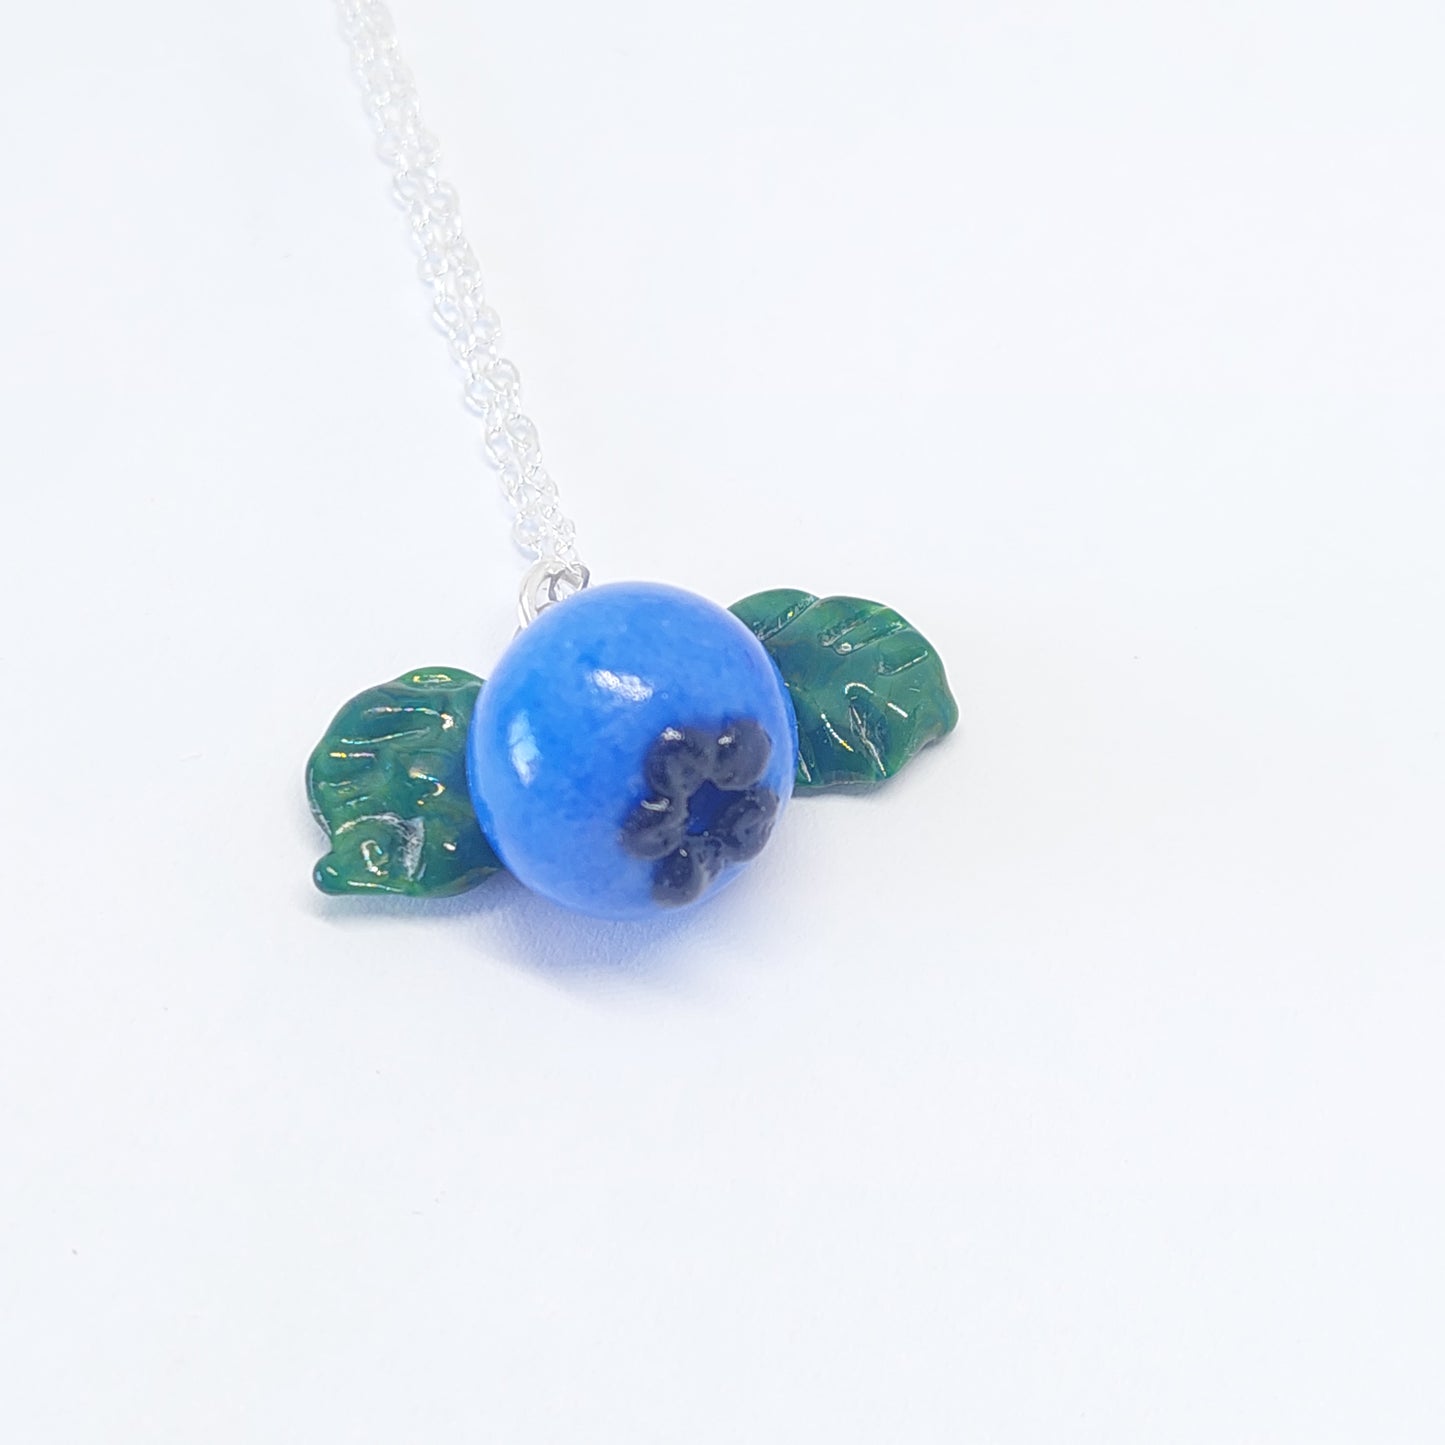 NEW!! Glass Art - Large Blueberry Necklace